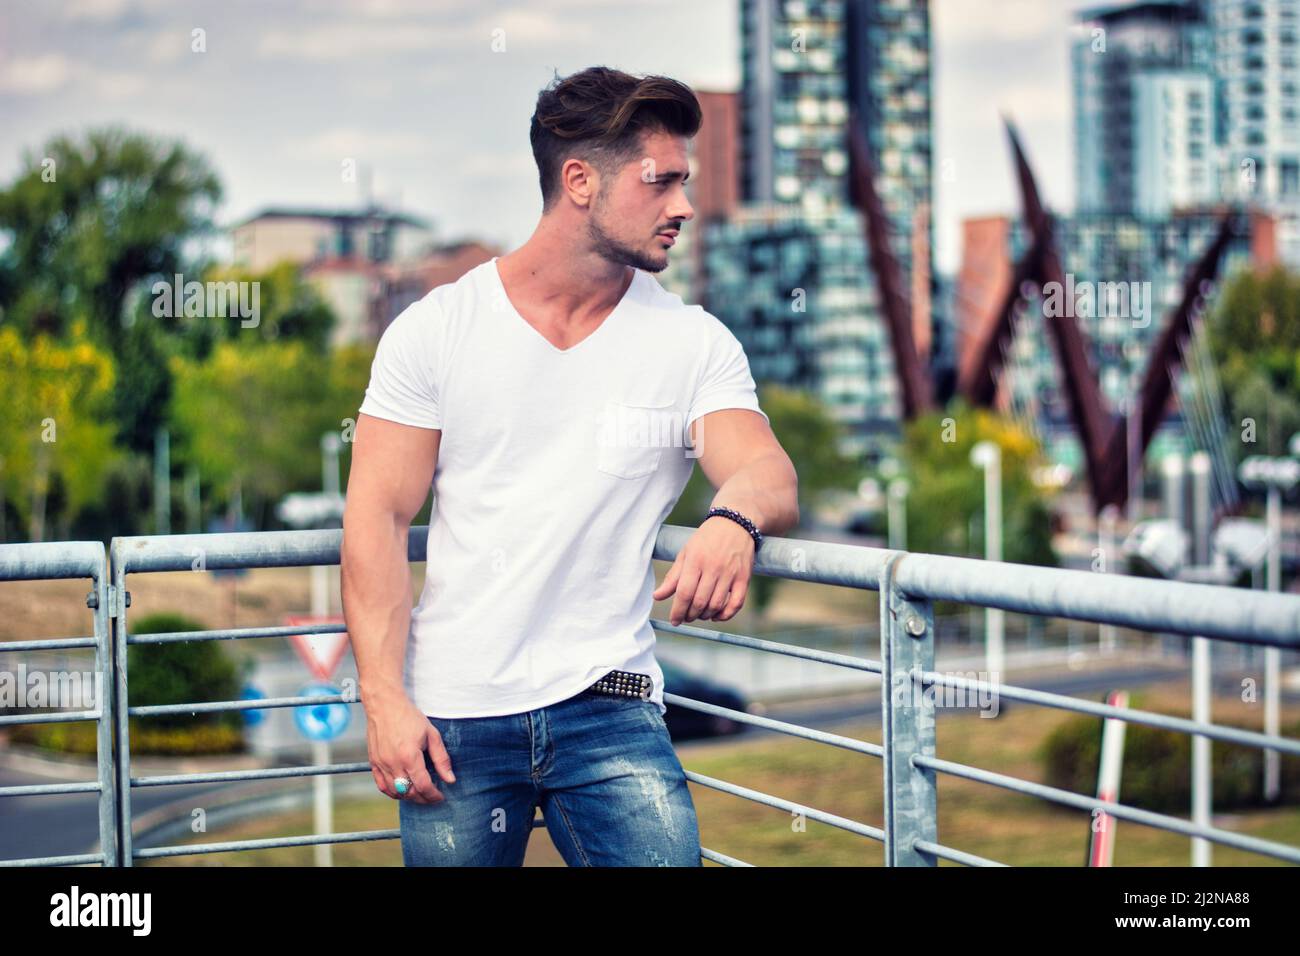 Handsome young man in white t-shirt outdoor in city setting Stock Photo